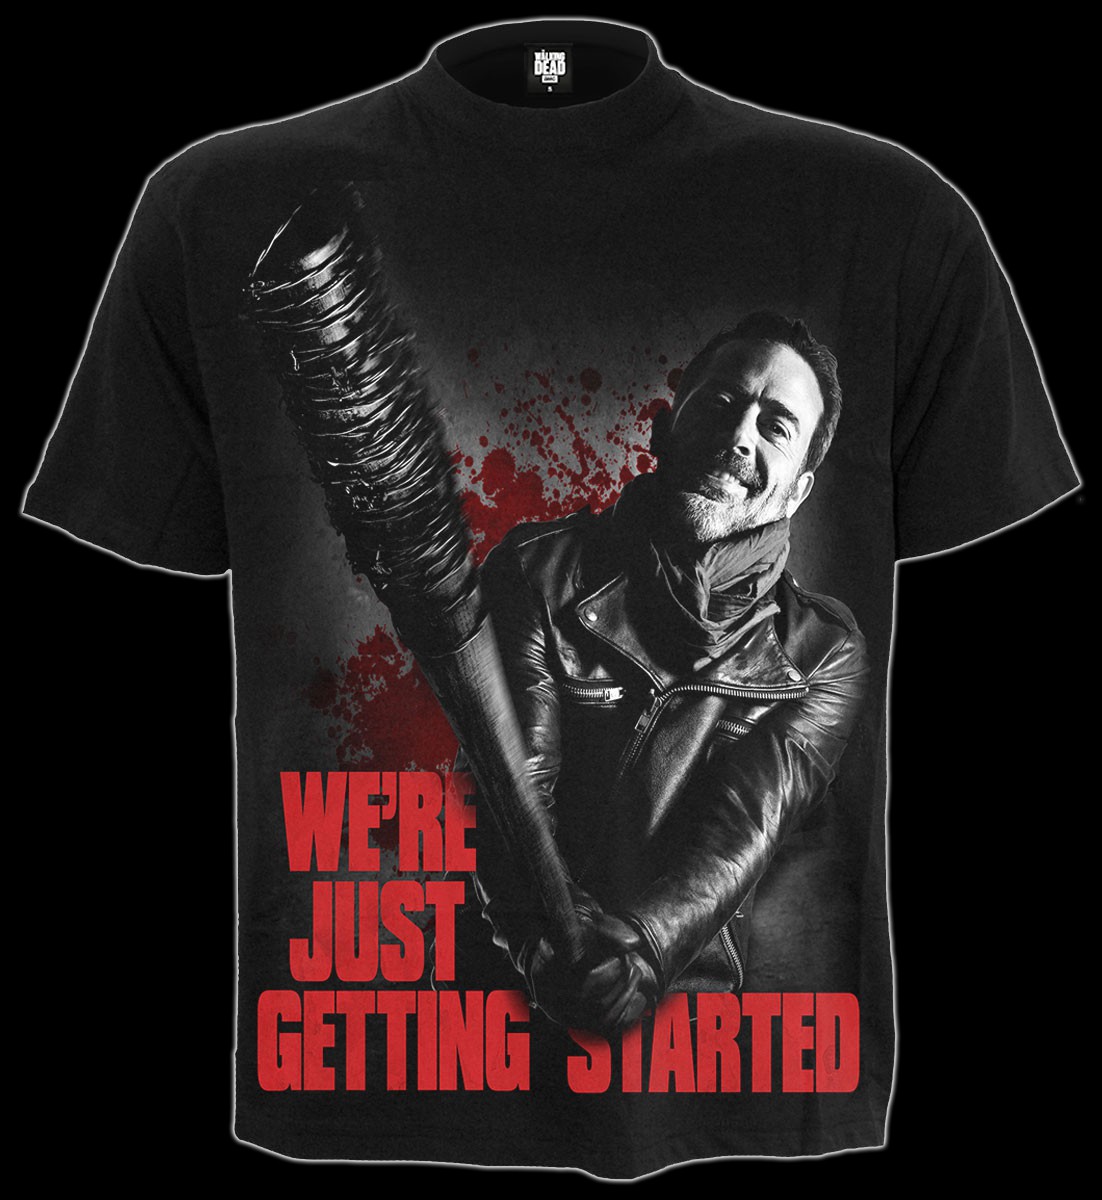 THE WALKING DEAD DOLMAN BY HER UNIVERSE NEW T-SHIRT OFFICIAL MERCHANDISE.